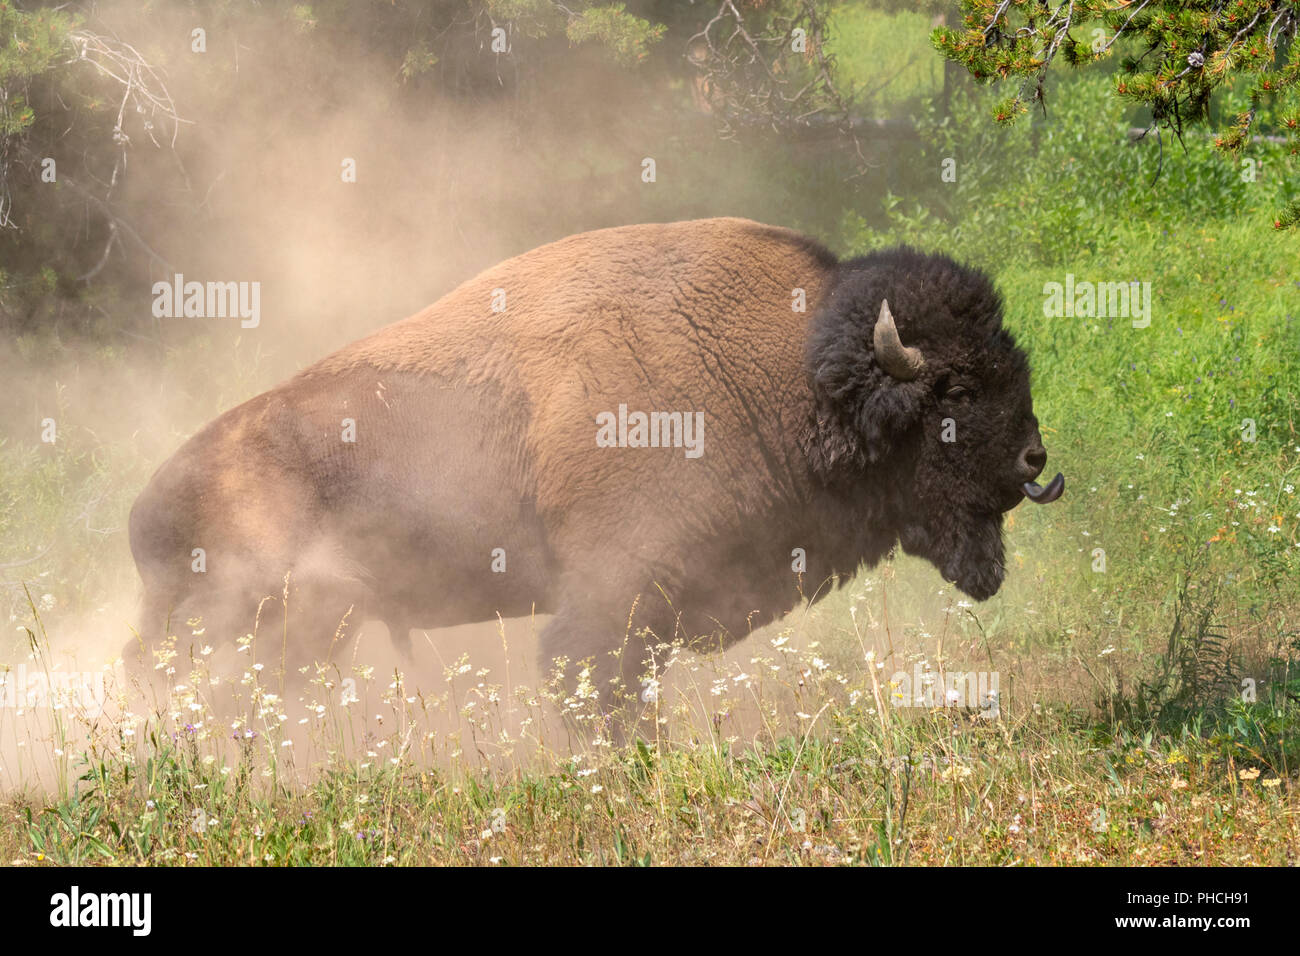 American bison (Bison bison) male bathing in dust, Yellowstone National park, Wyoming, USA Stock Photo